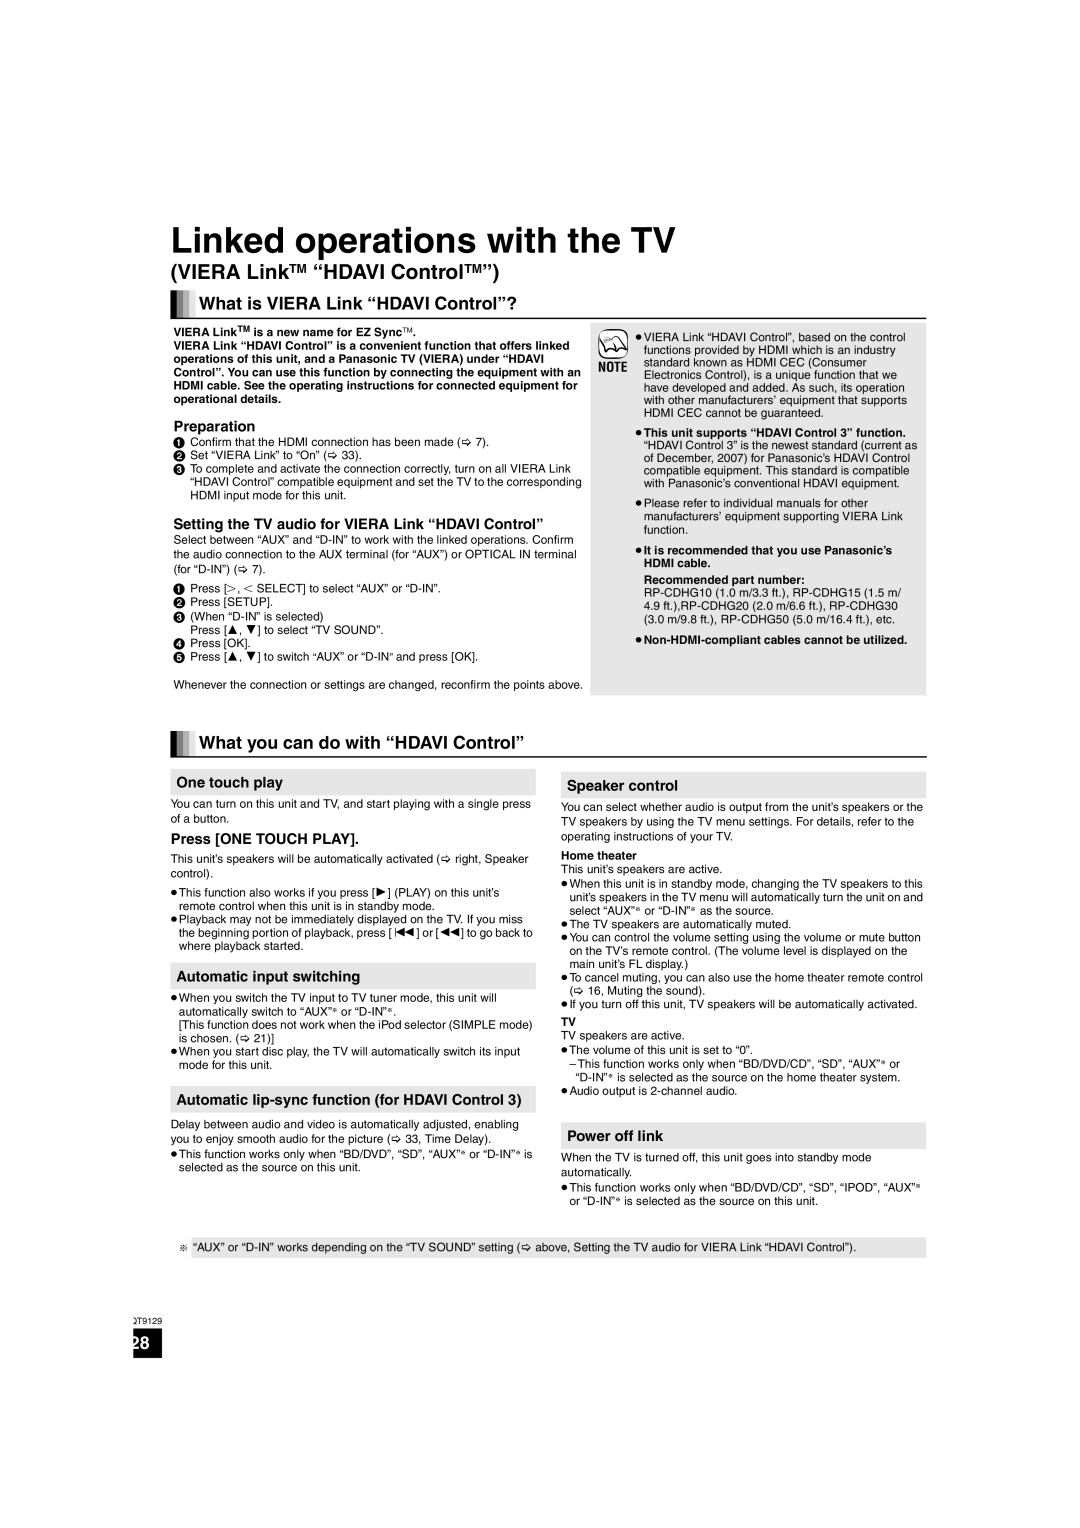 Panasonic SC-BT100 Linked operations with the TV, VIERA LinkTM “HDAVI ControlTM”, What is VIERA Link “HDAVI Control”? 